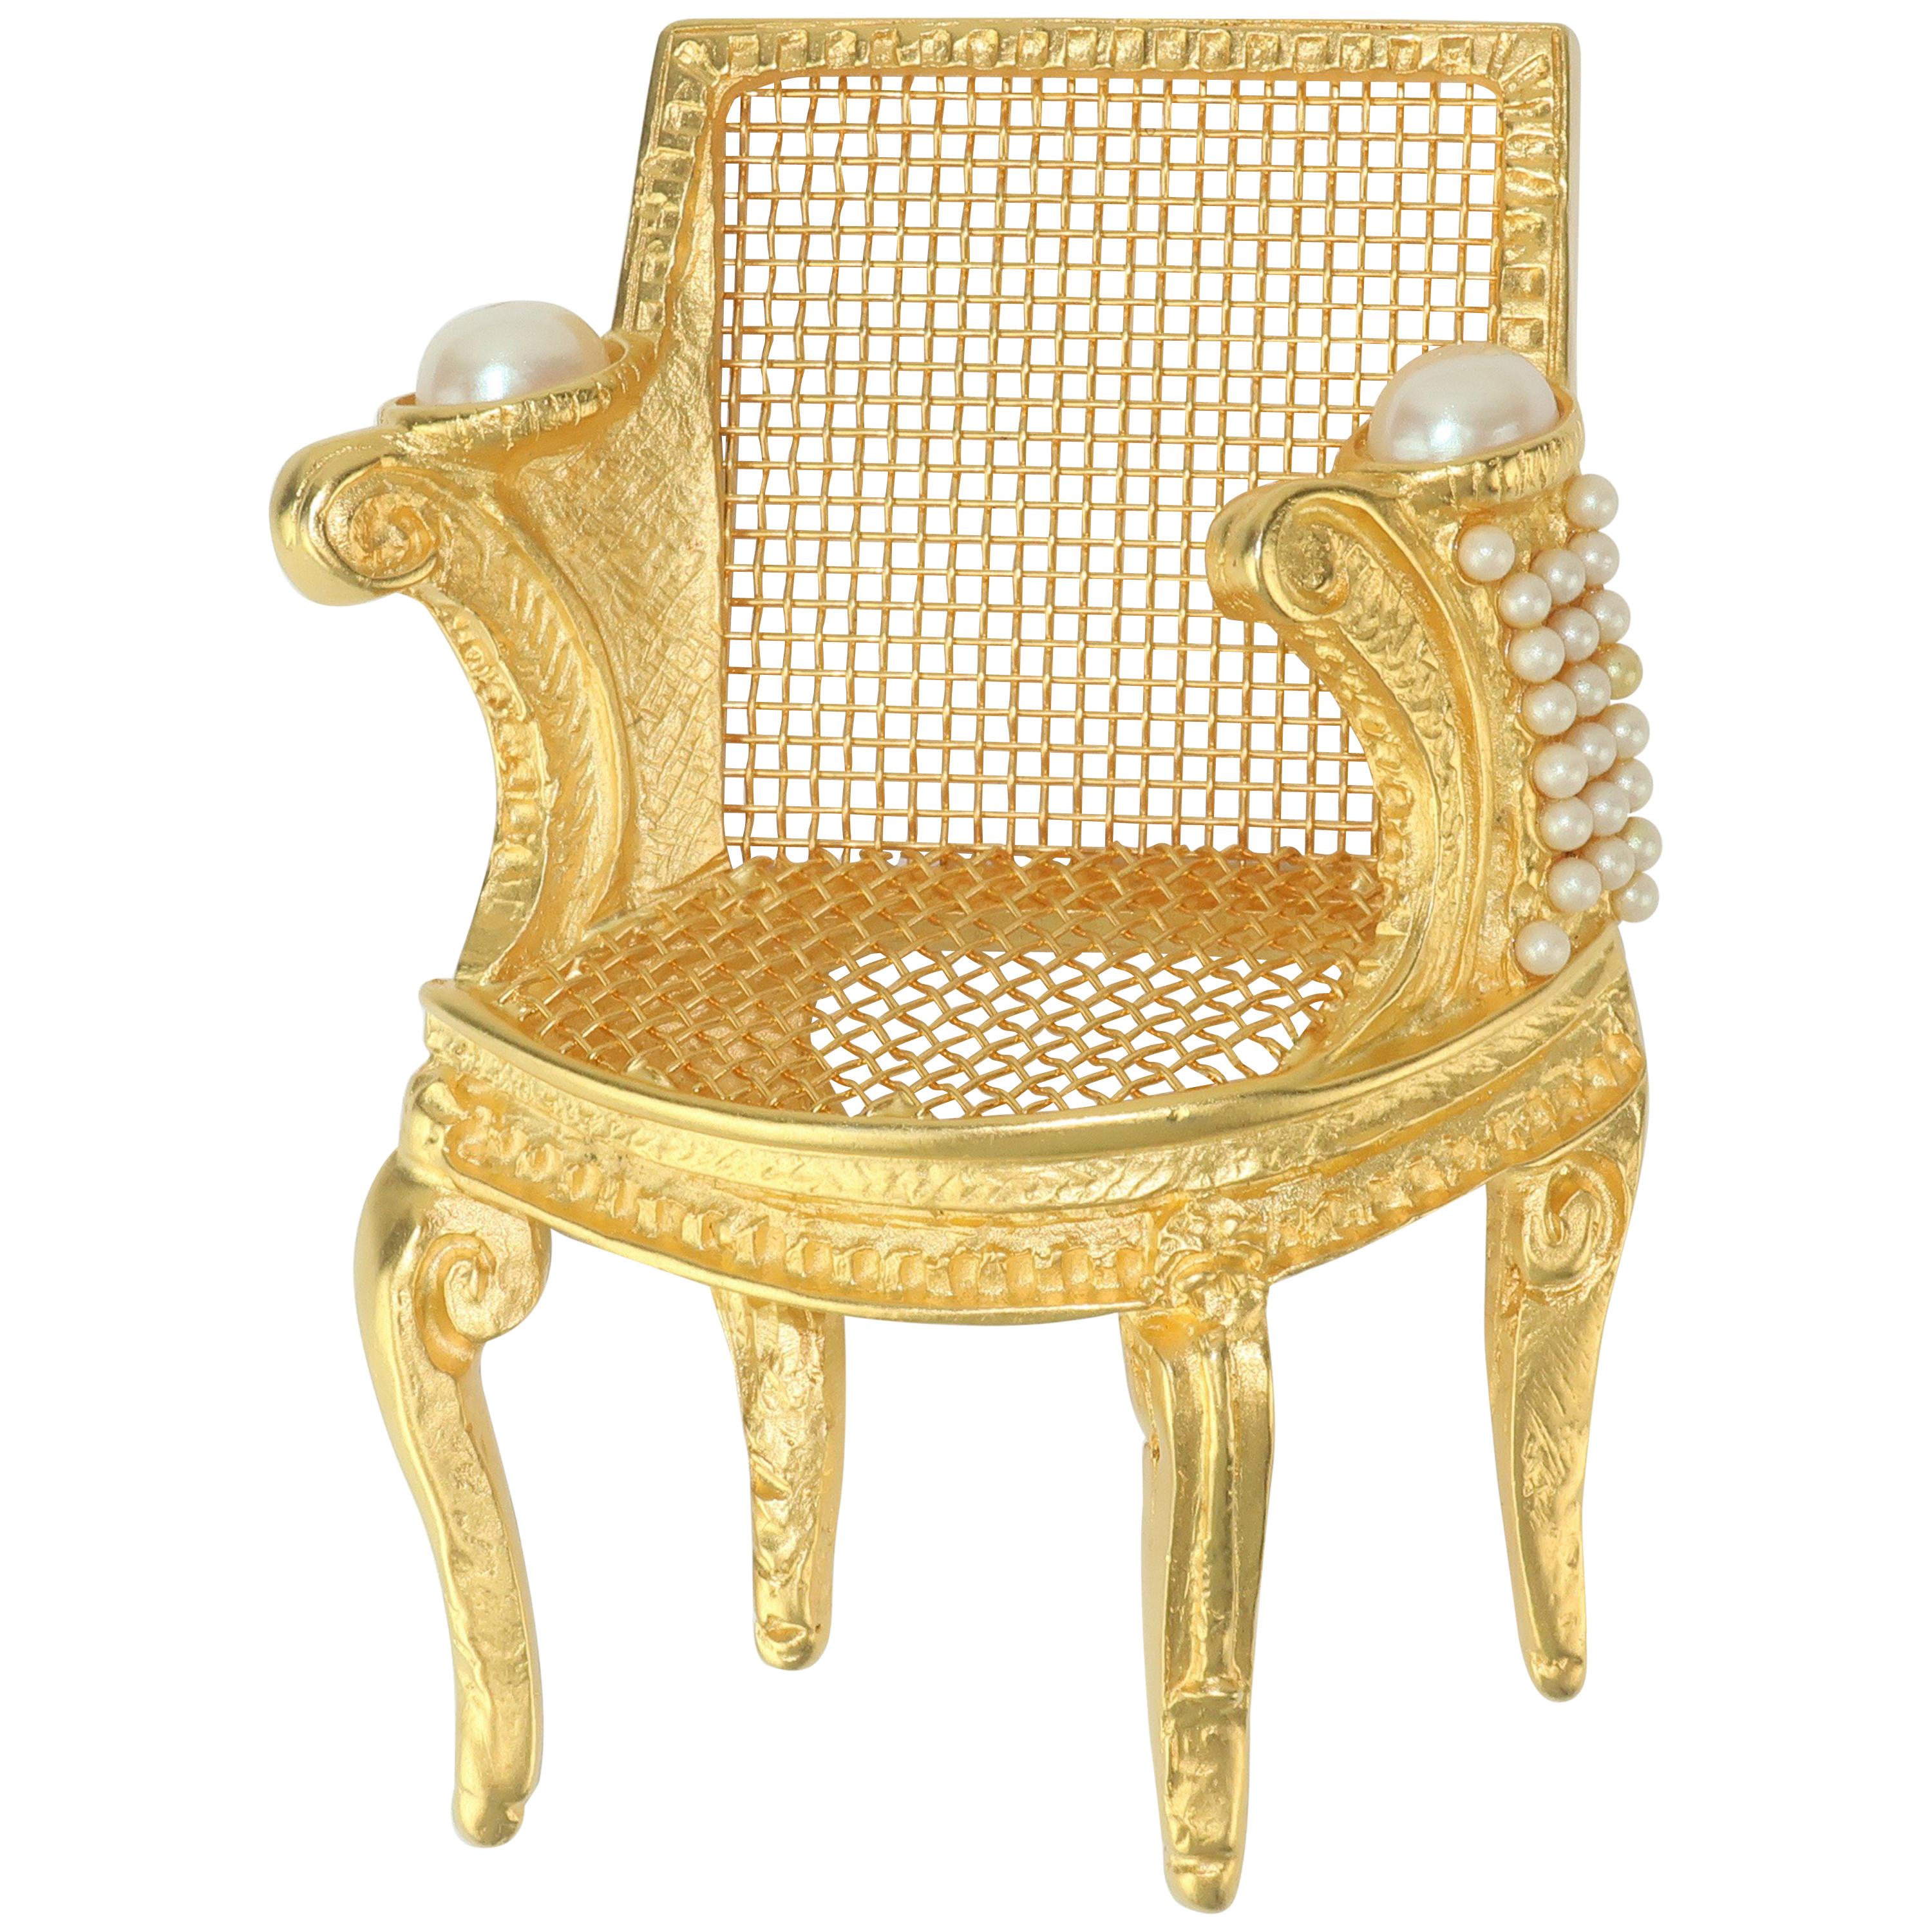 Large Karl Lagerfeld Gilt Gold 3-D Chair Brooch With Pearls